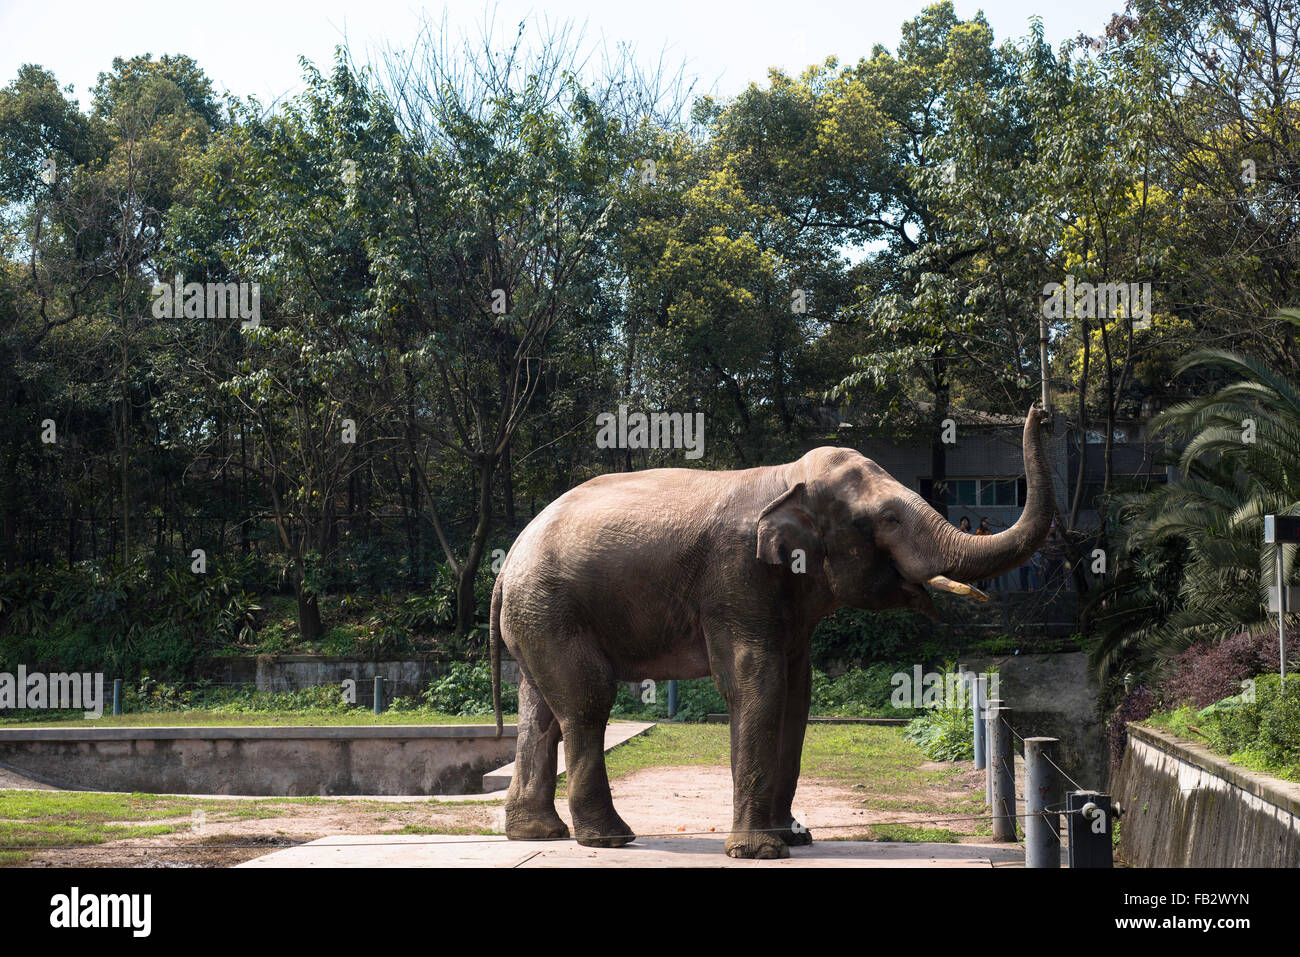 elephant profile side view standing up at chongqing zoo in China. Stock Photo